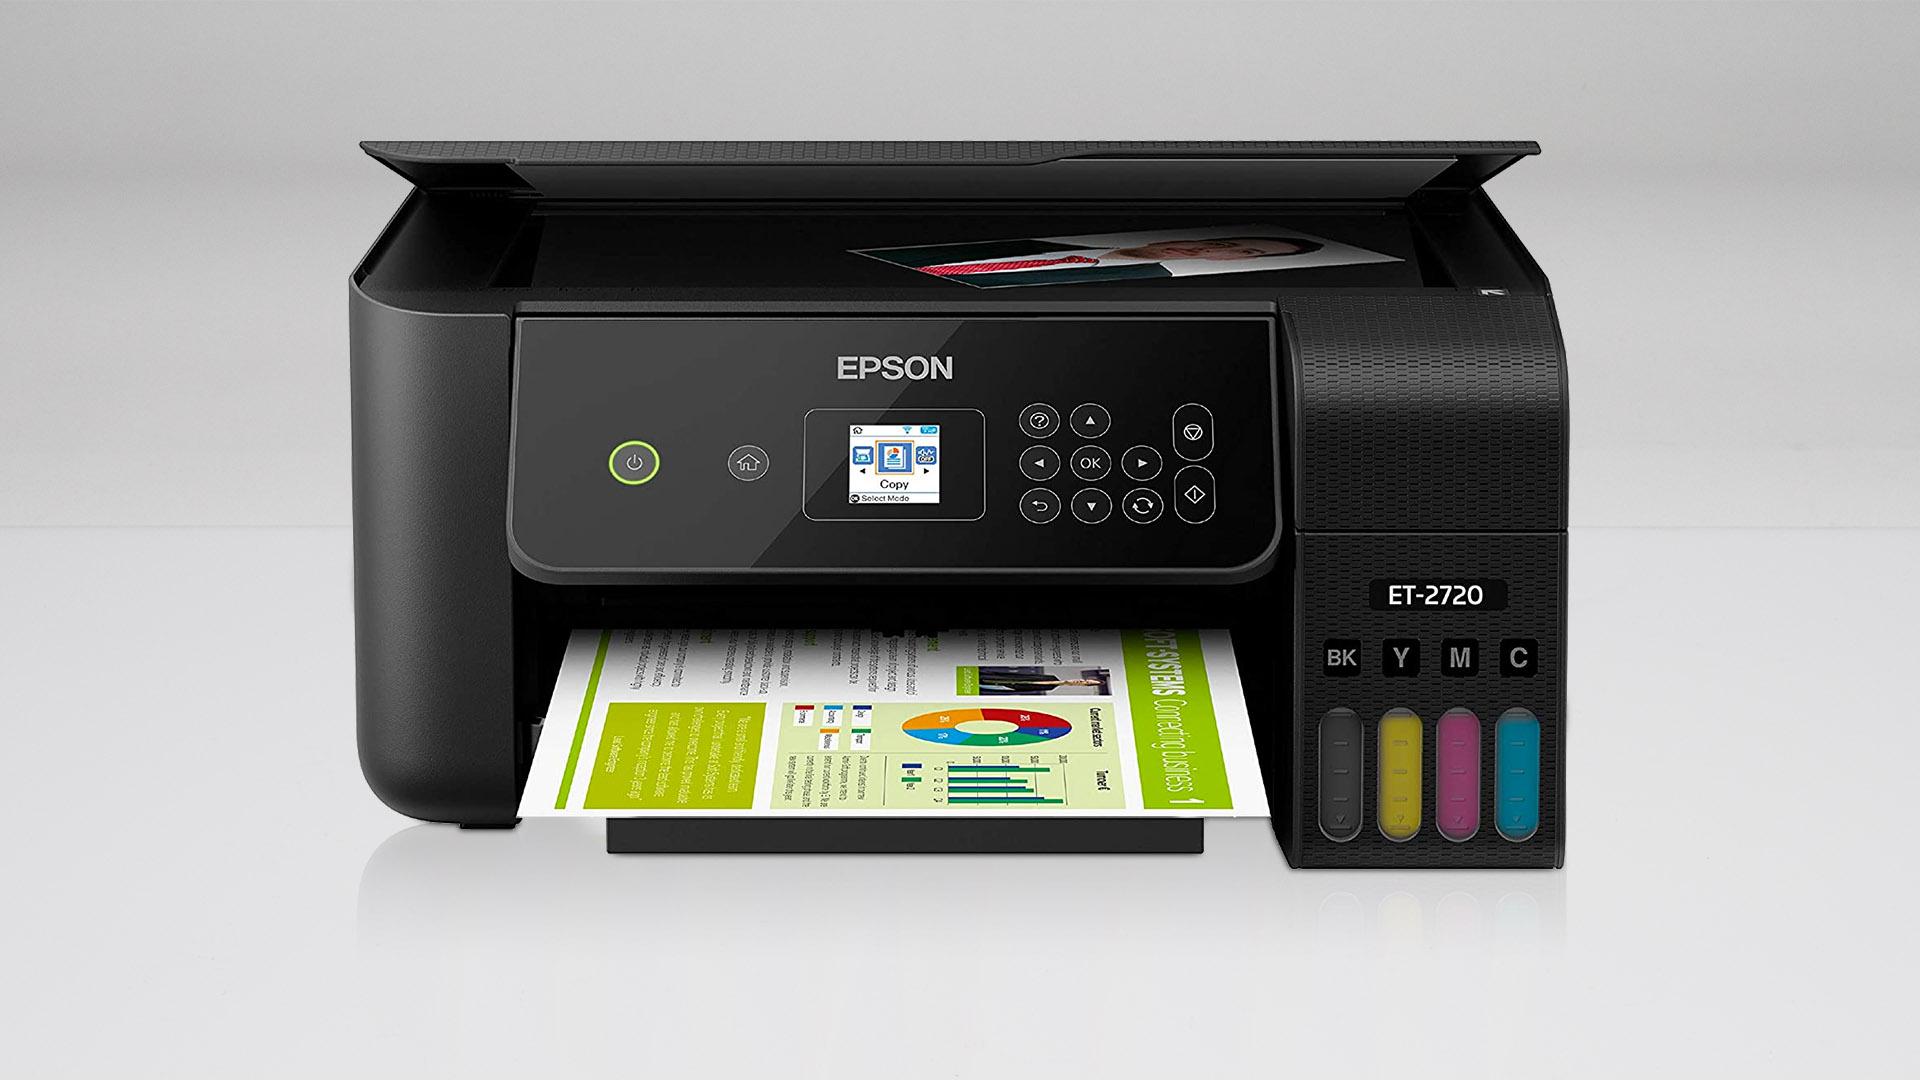 Epson ET-8550 setup. Initial install of the Epson EcoTank A3+ printer. Ink  loading and software 